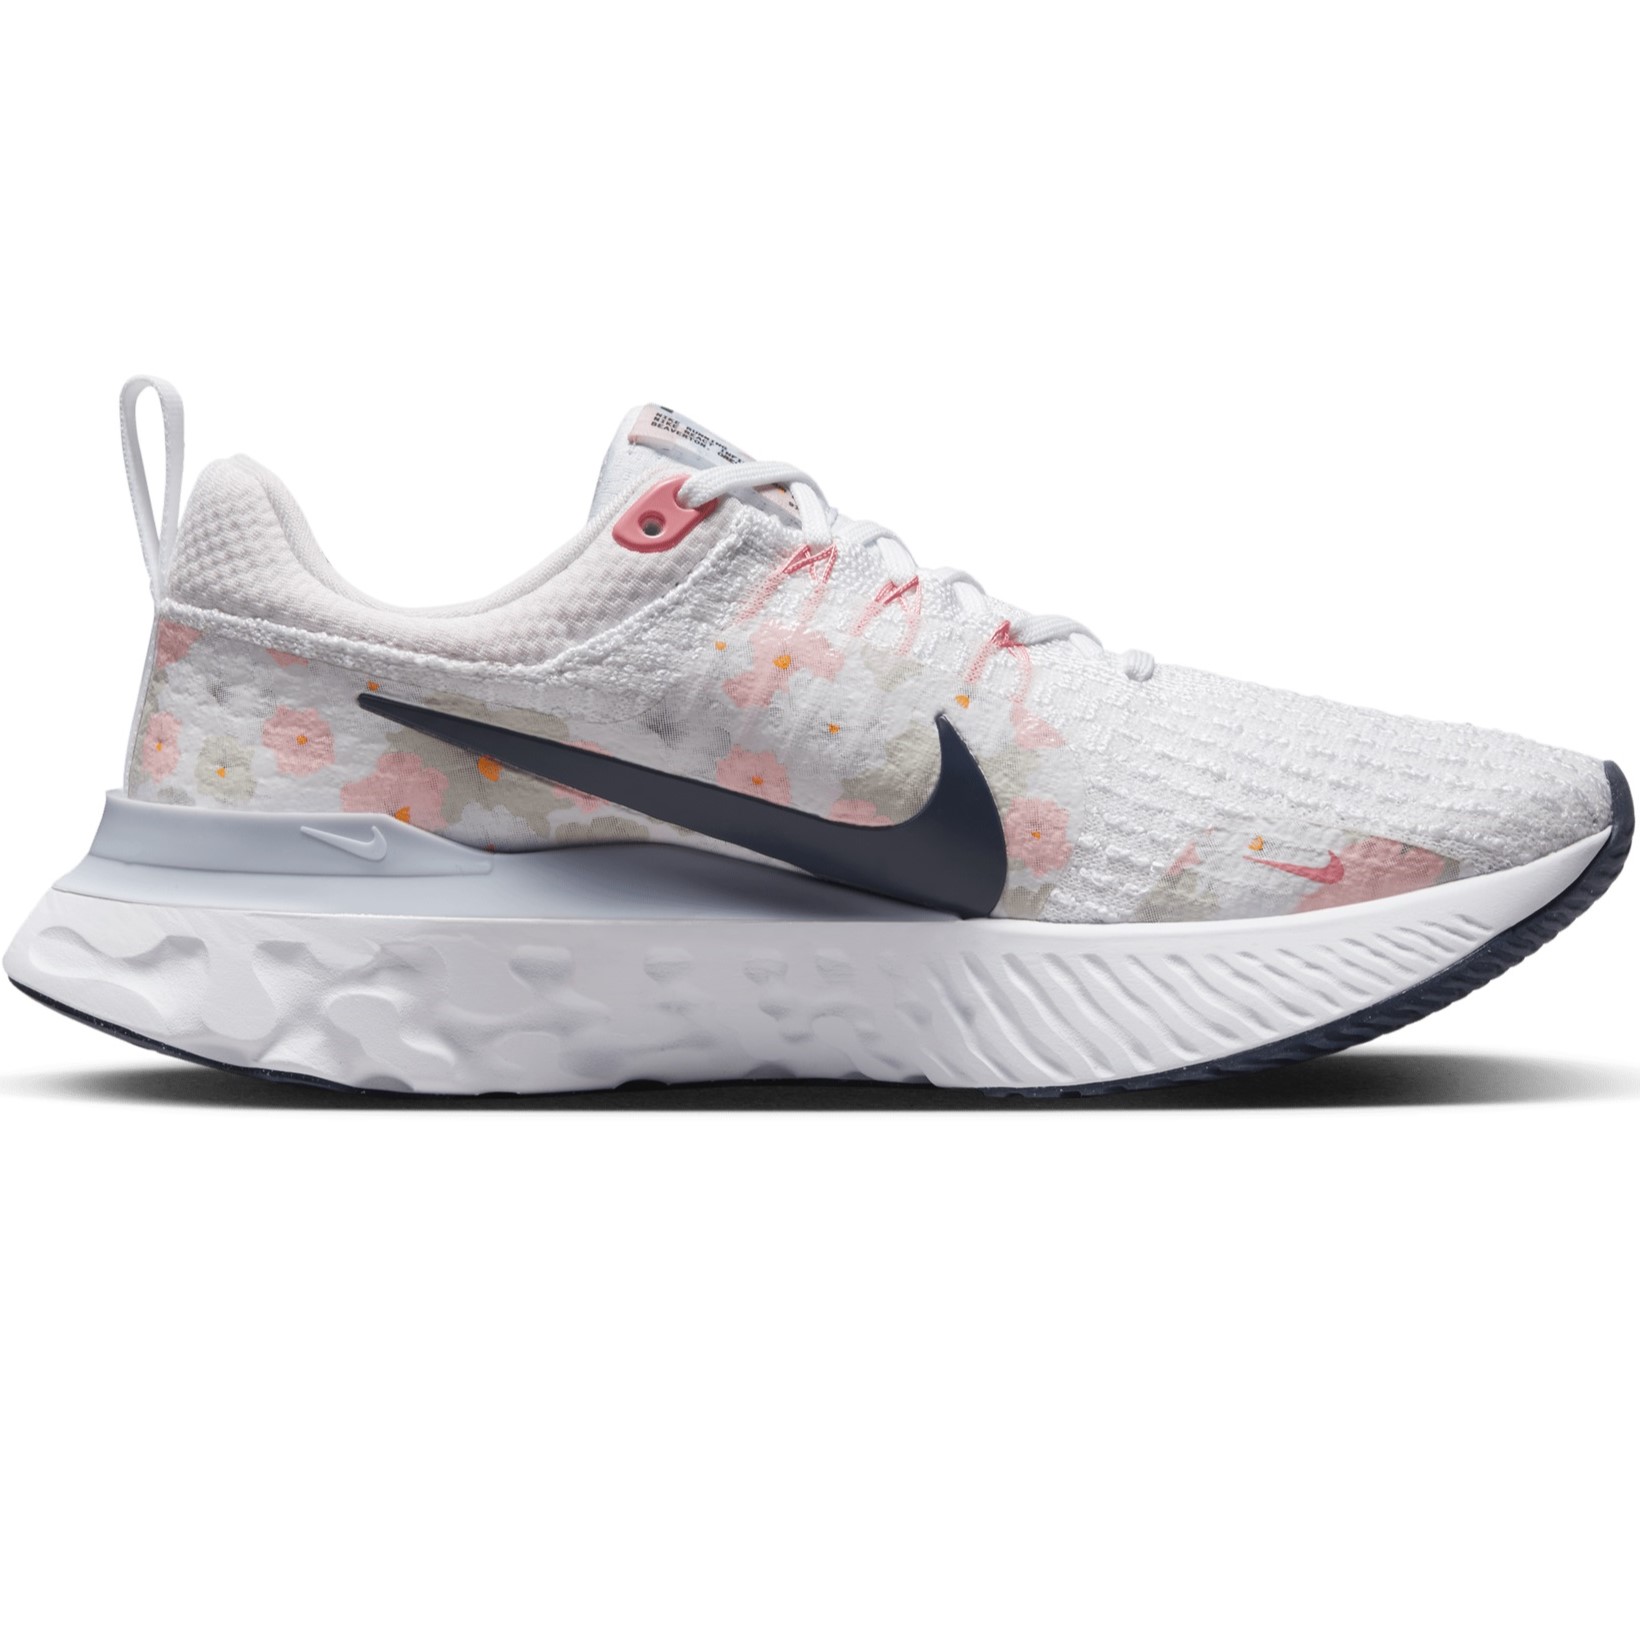 GIÀY THỂ THAO NIKE NỮ REACT INFINITY 3 PREMIUM WHITE PEARL PINK WOMENS ROAD RUNNING SHOES FD4151-100 2